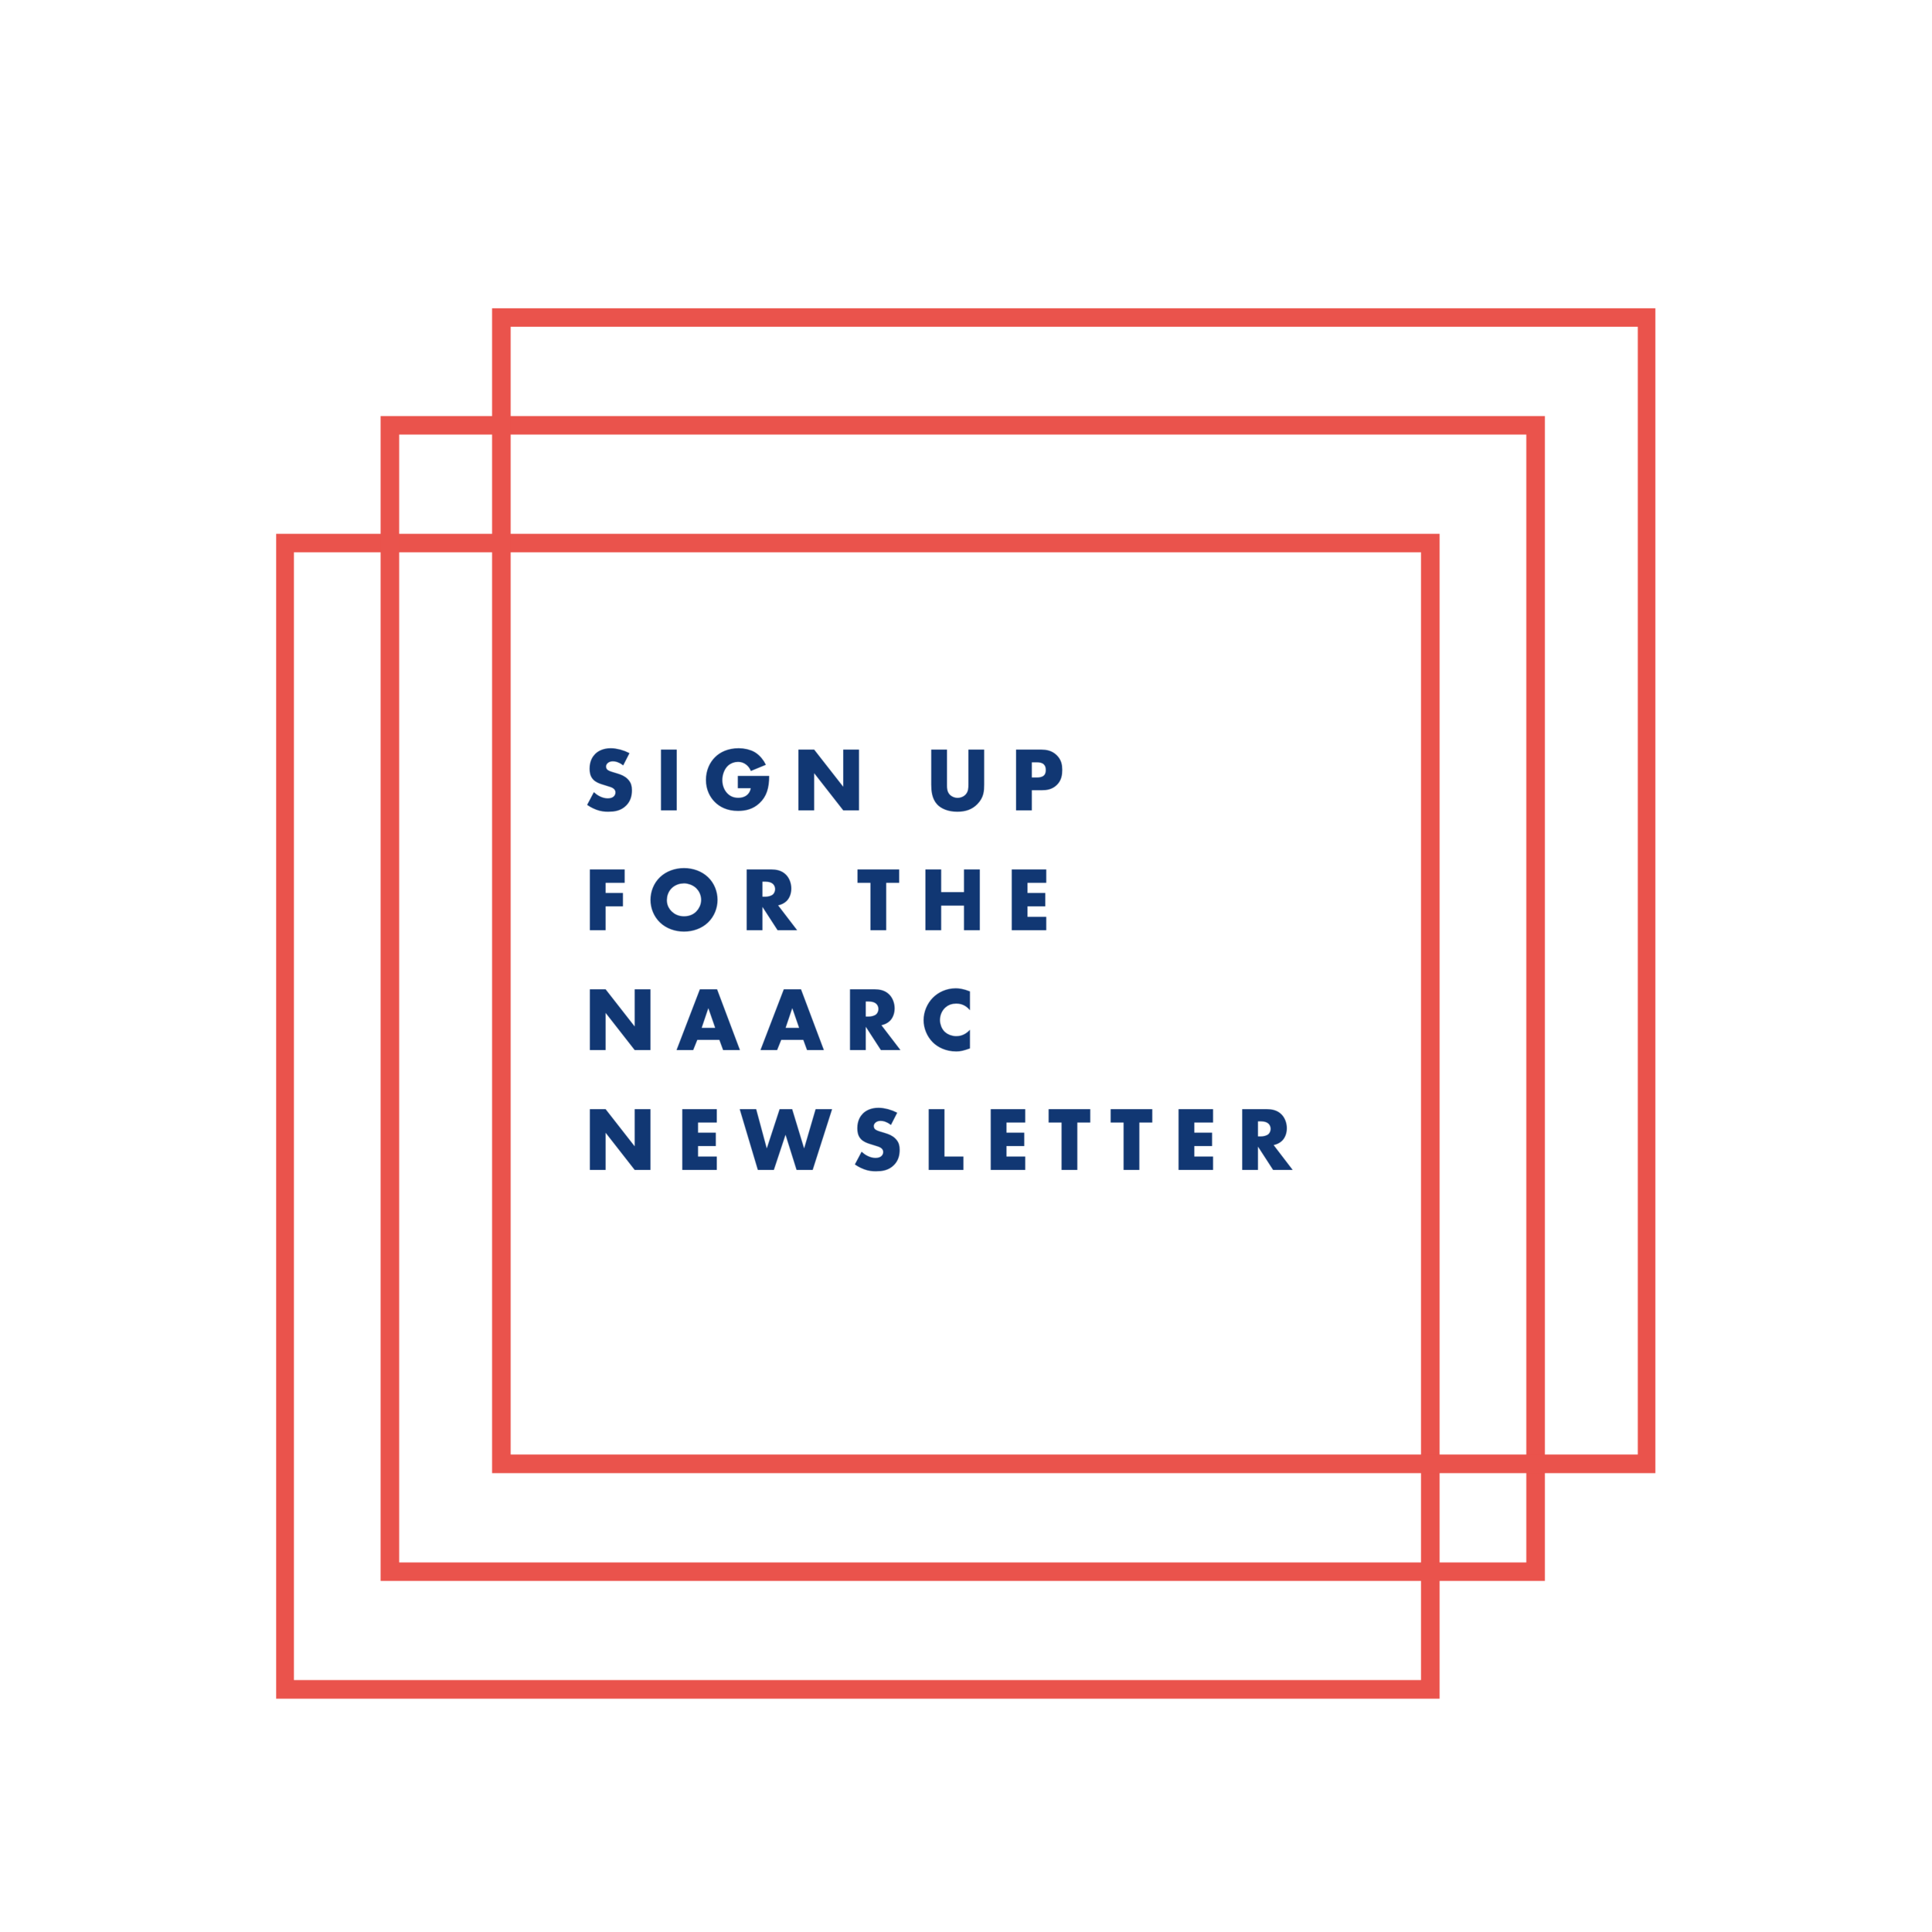 Sign Up for the NAARC Newsletter